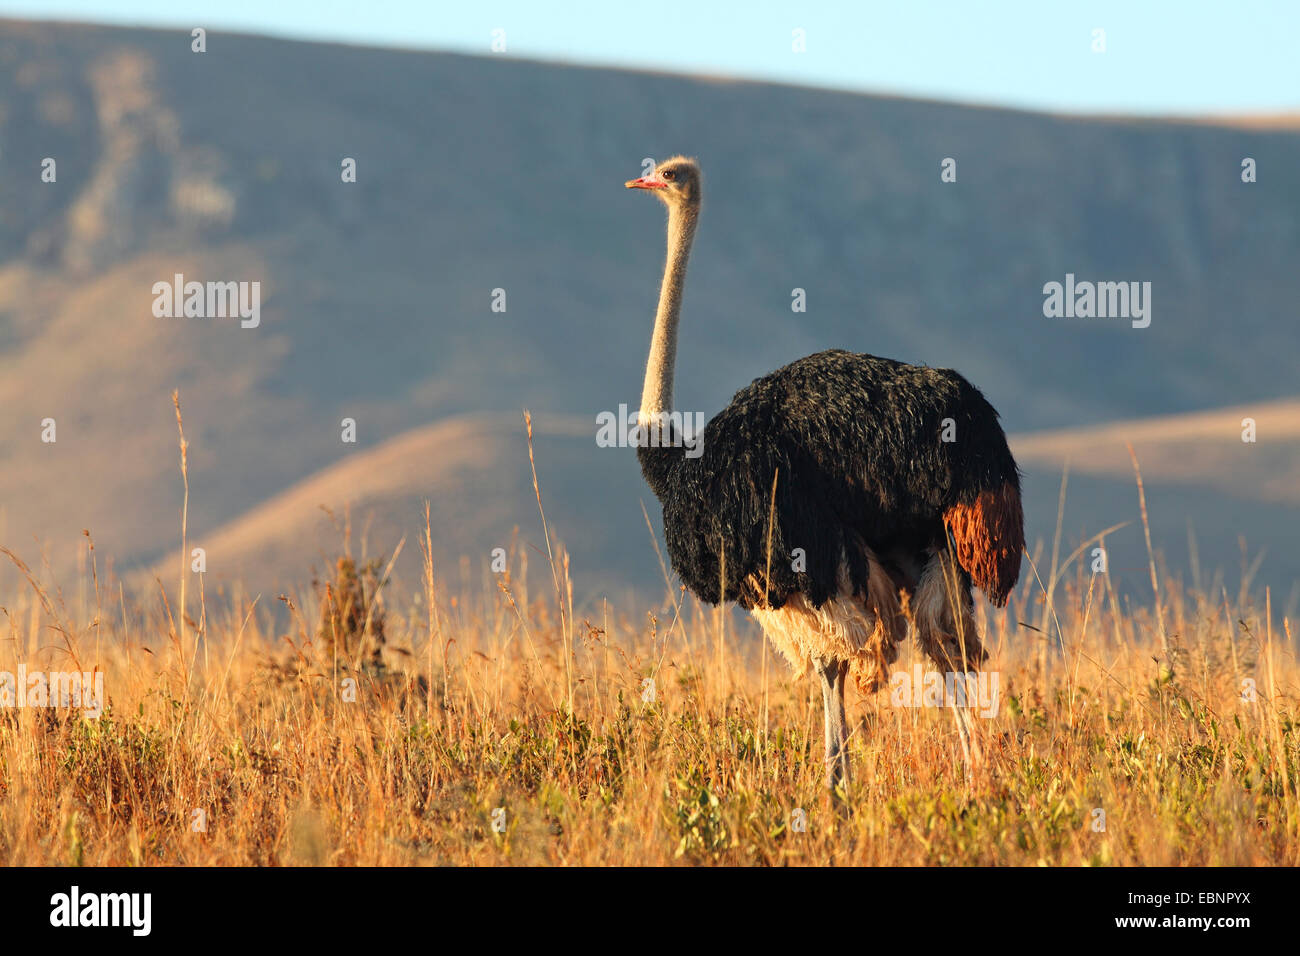 Southern ostrich (Struthio camelus australis, Struthio australis), male stands in grassland in morning light, South Africa, Ithala Game Reserve Stock Photo